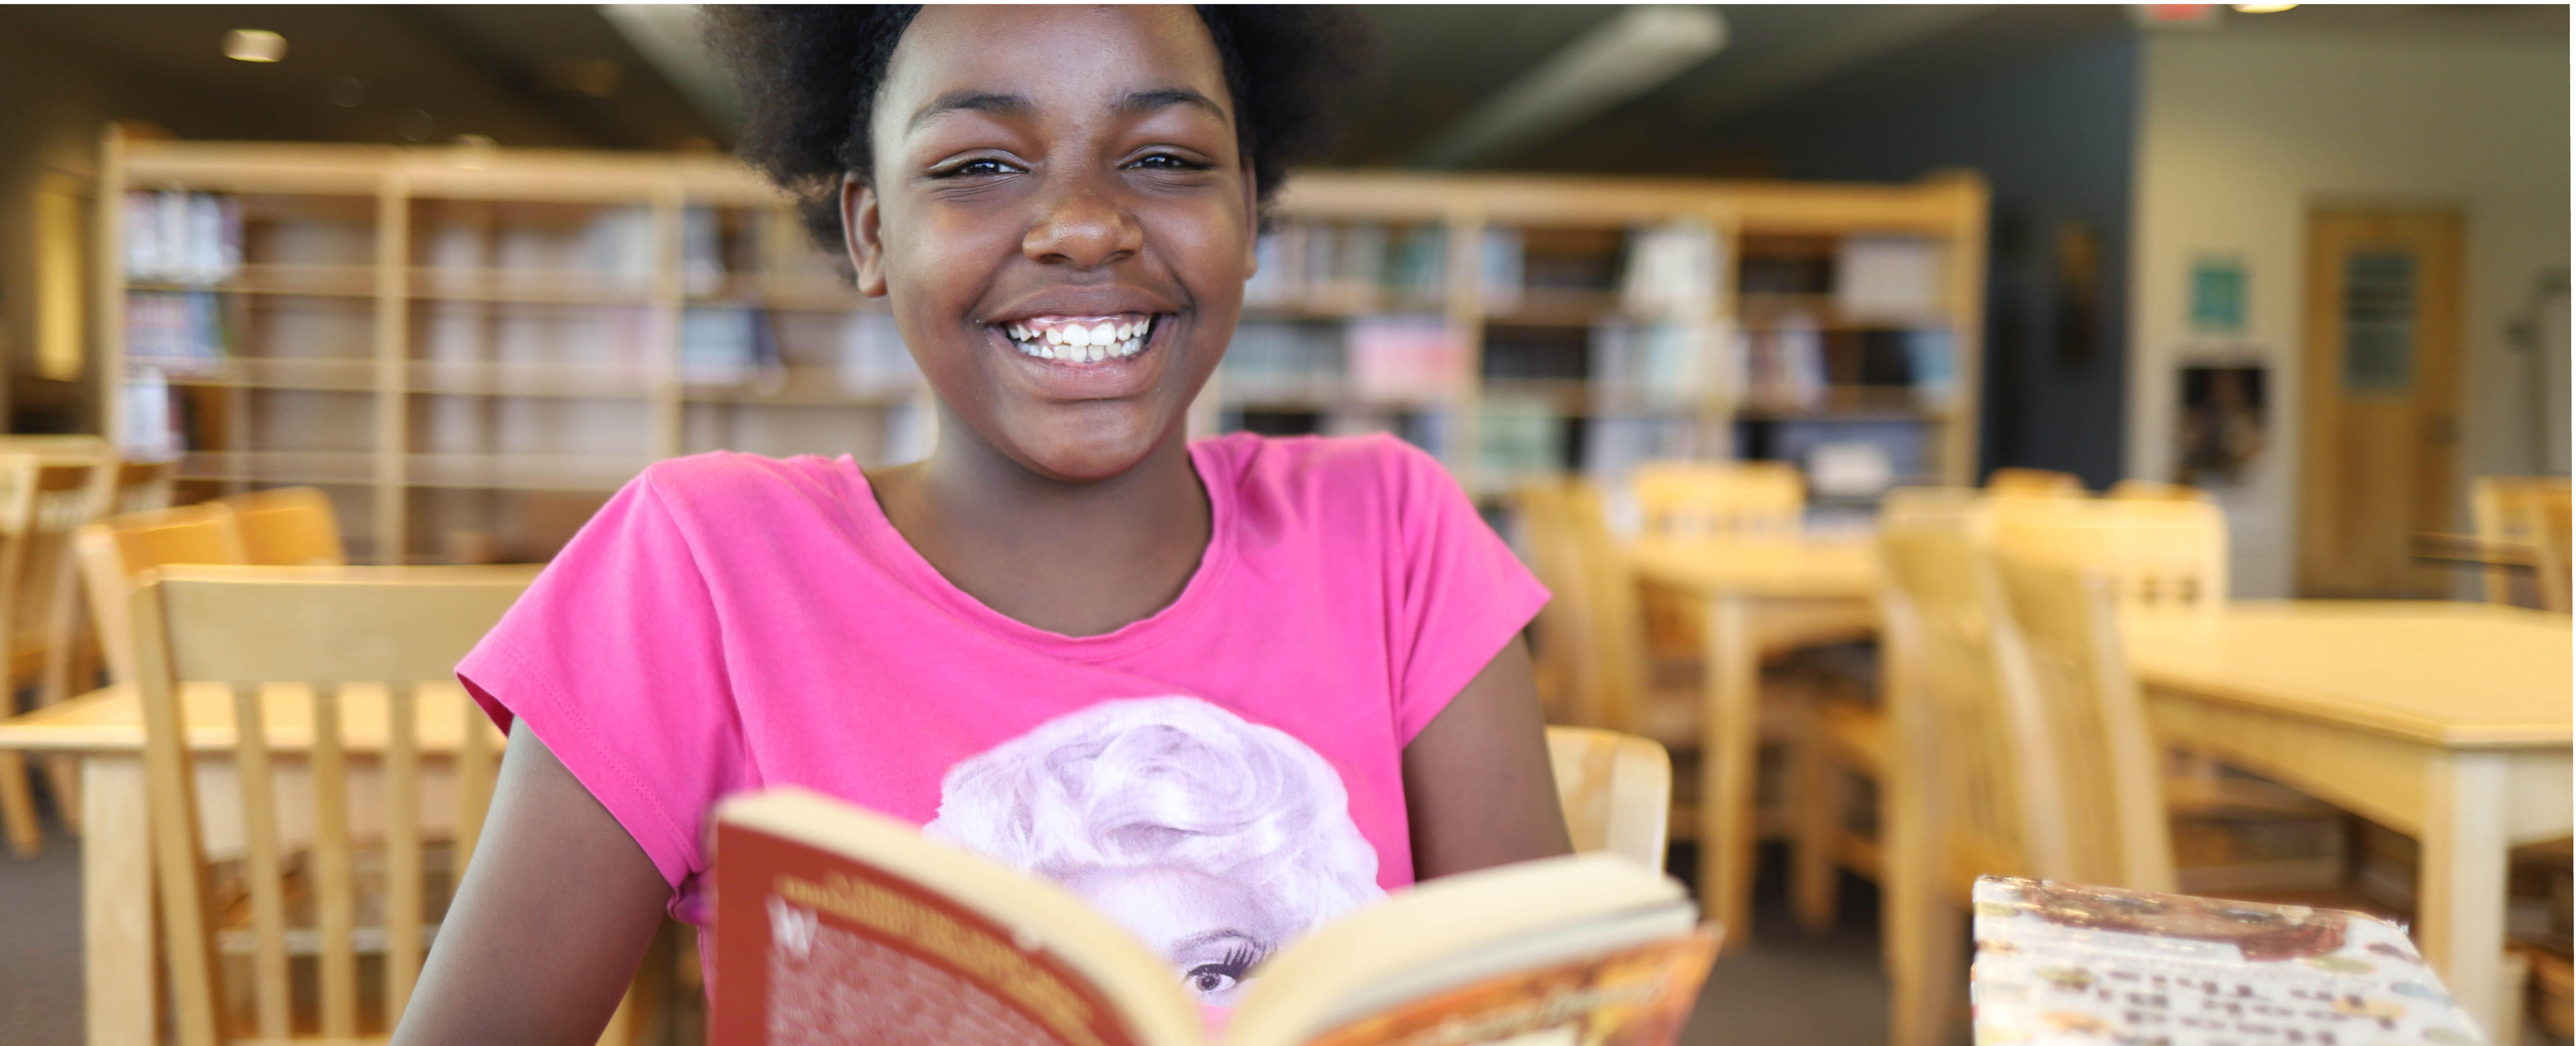 Student smiling while reading a book in the library